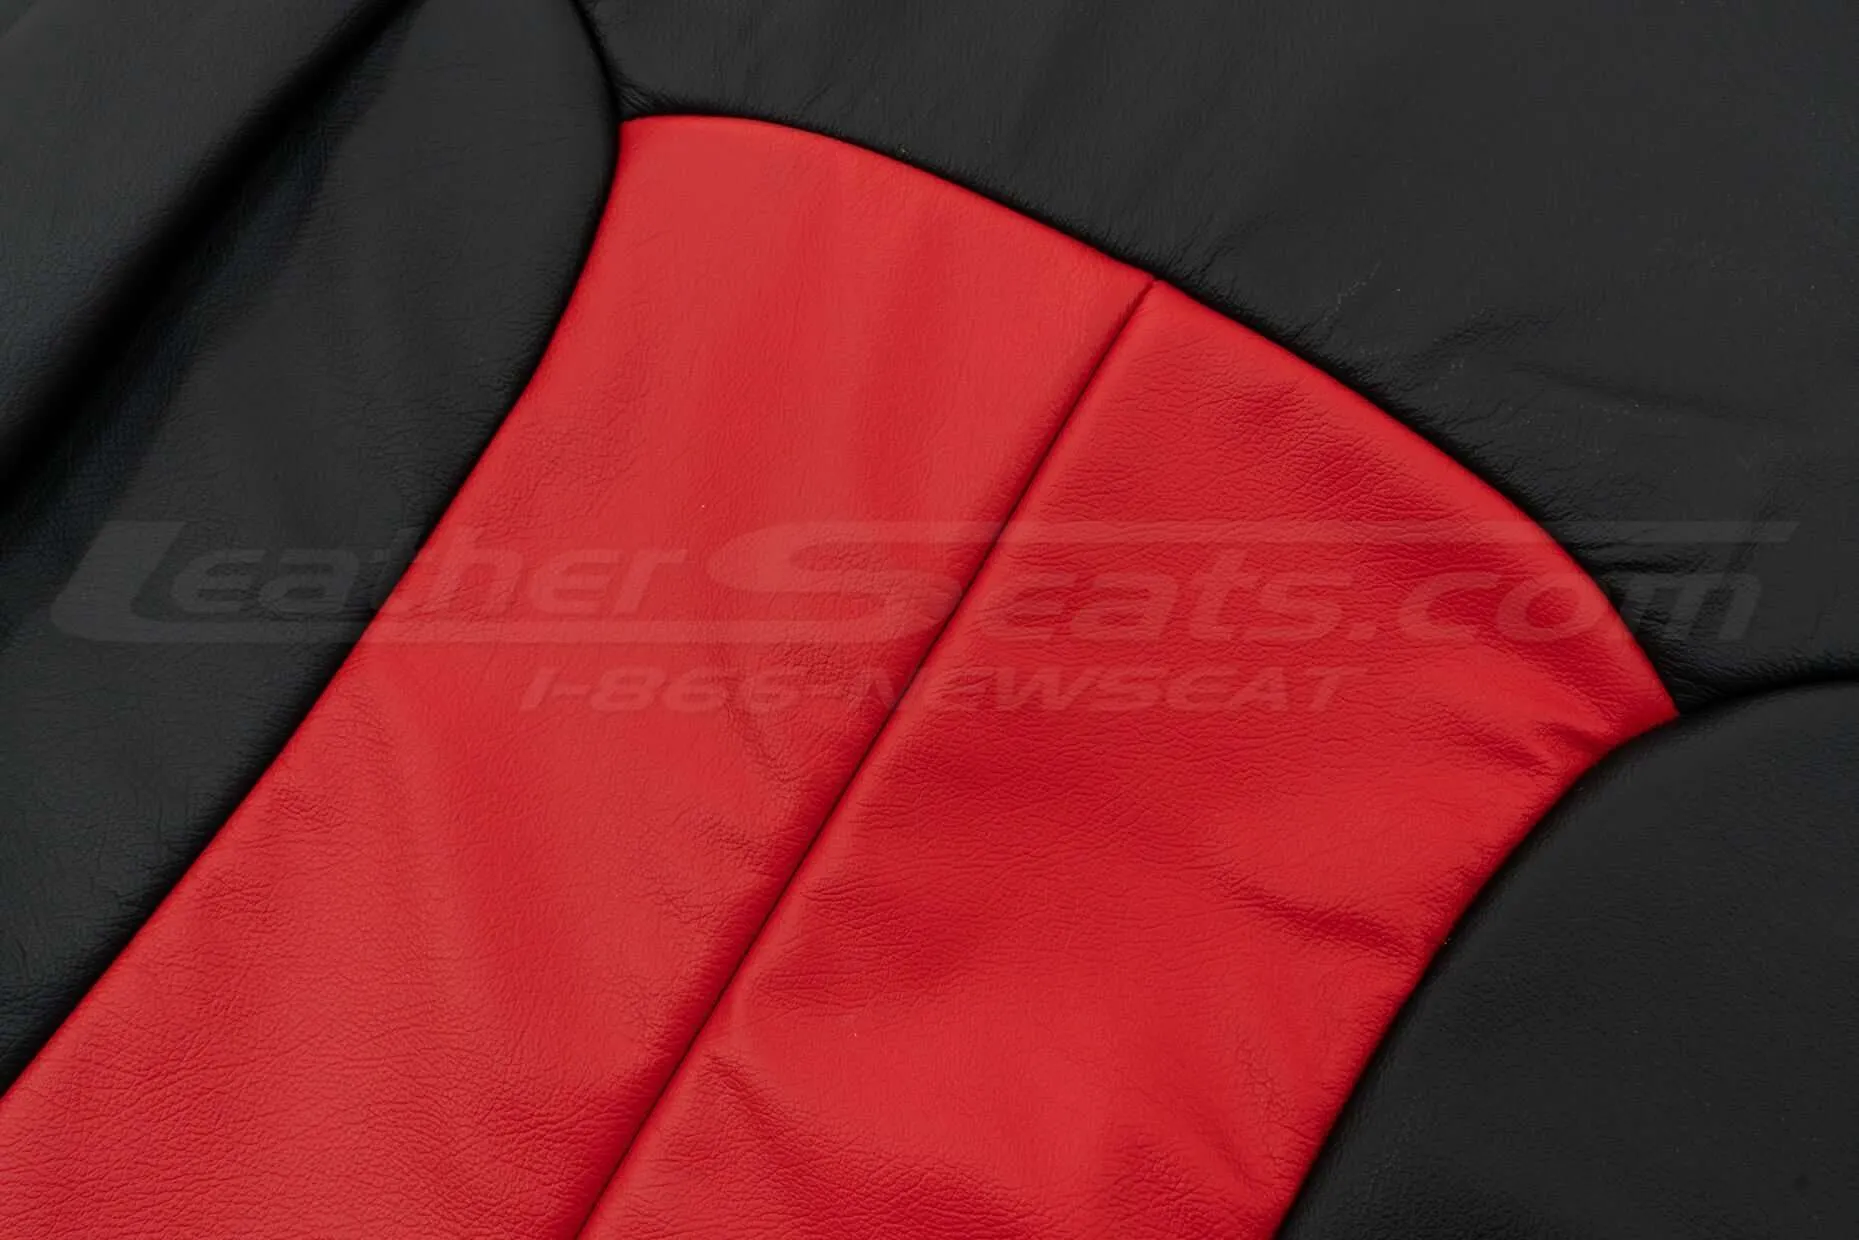 Black and Bright Red leather texture